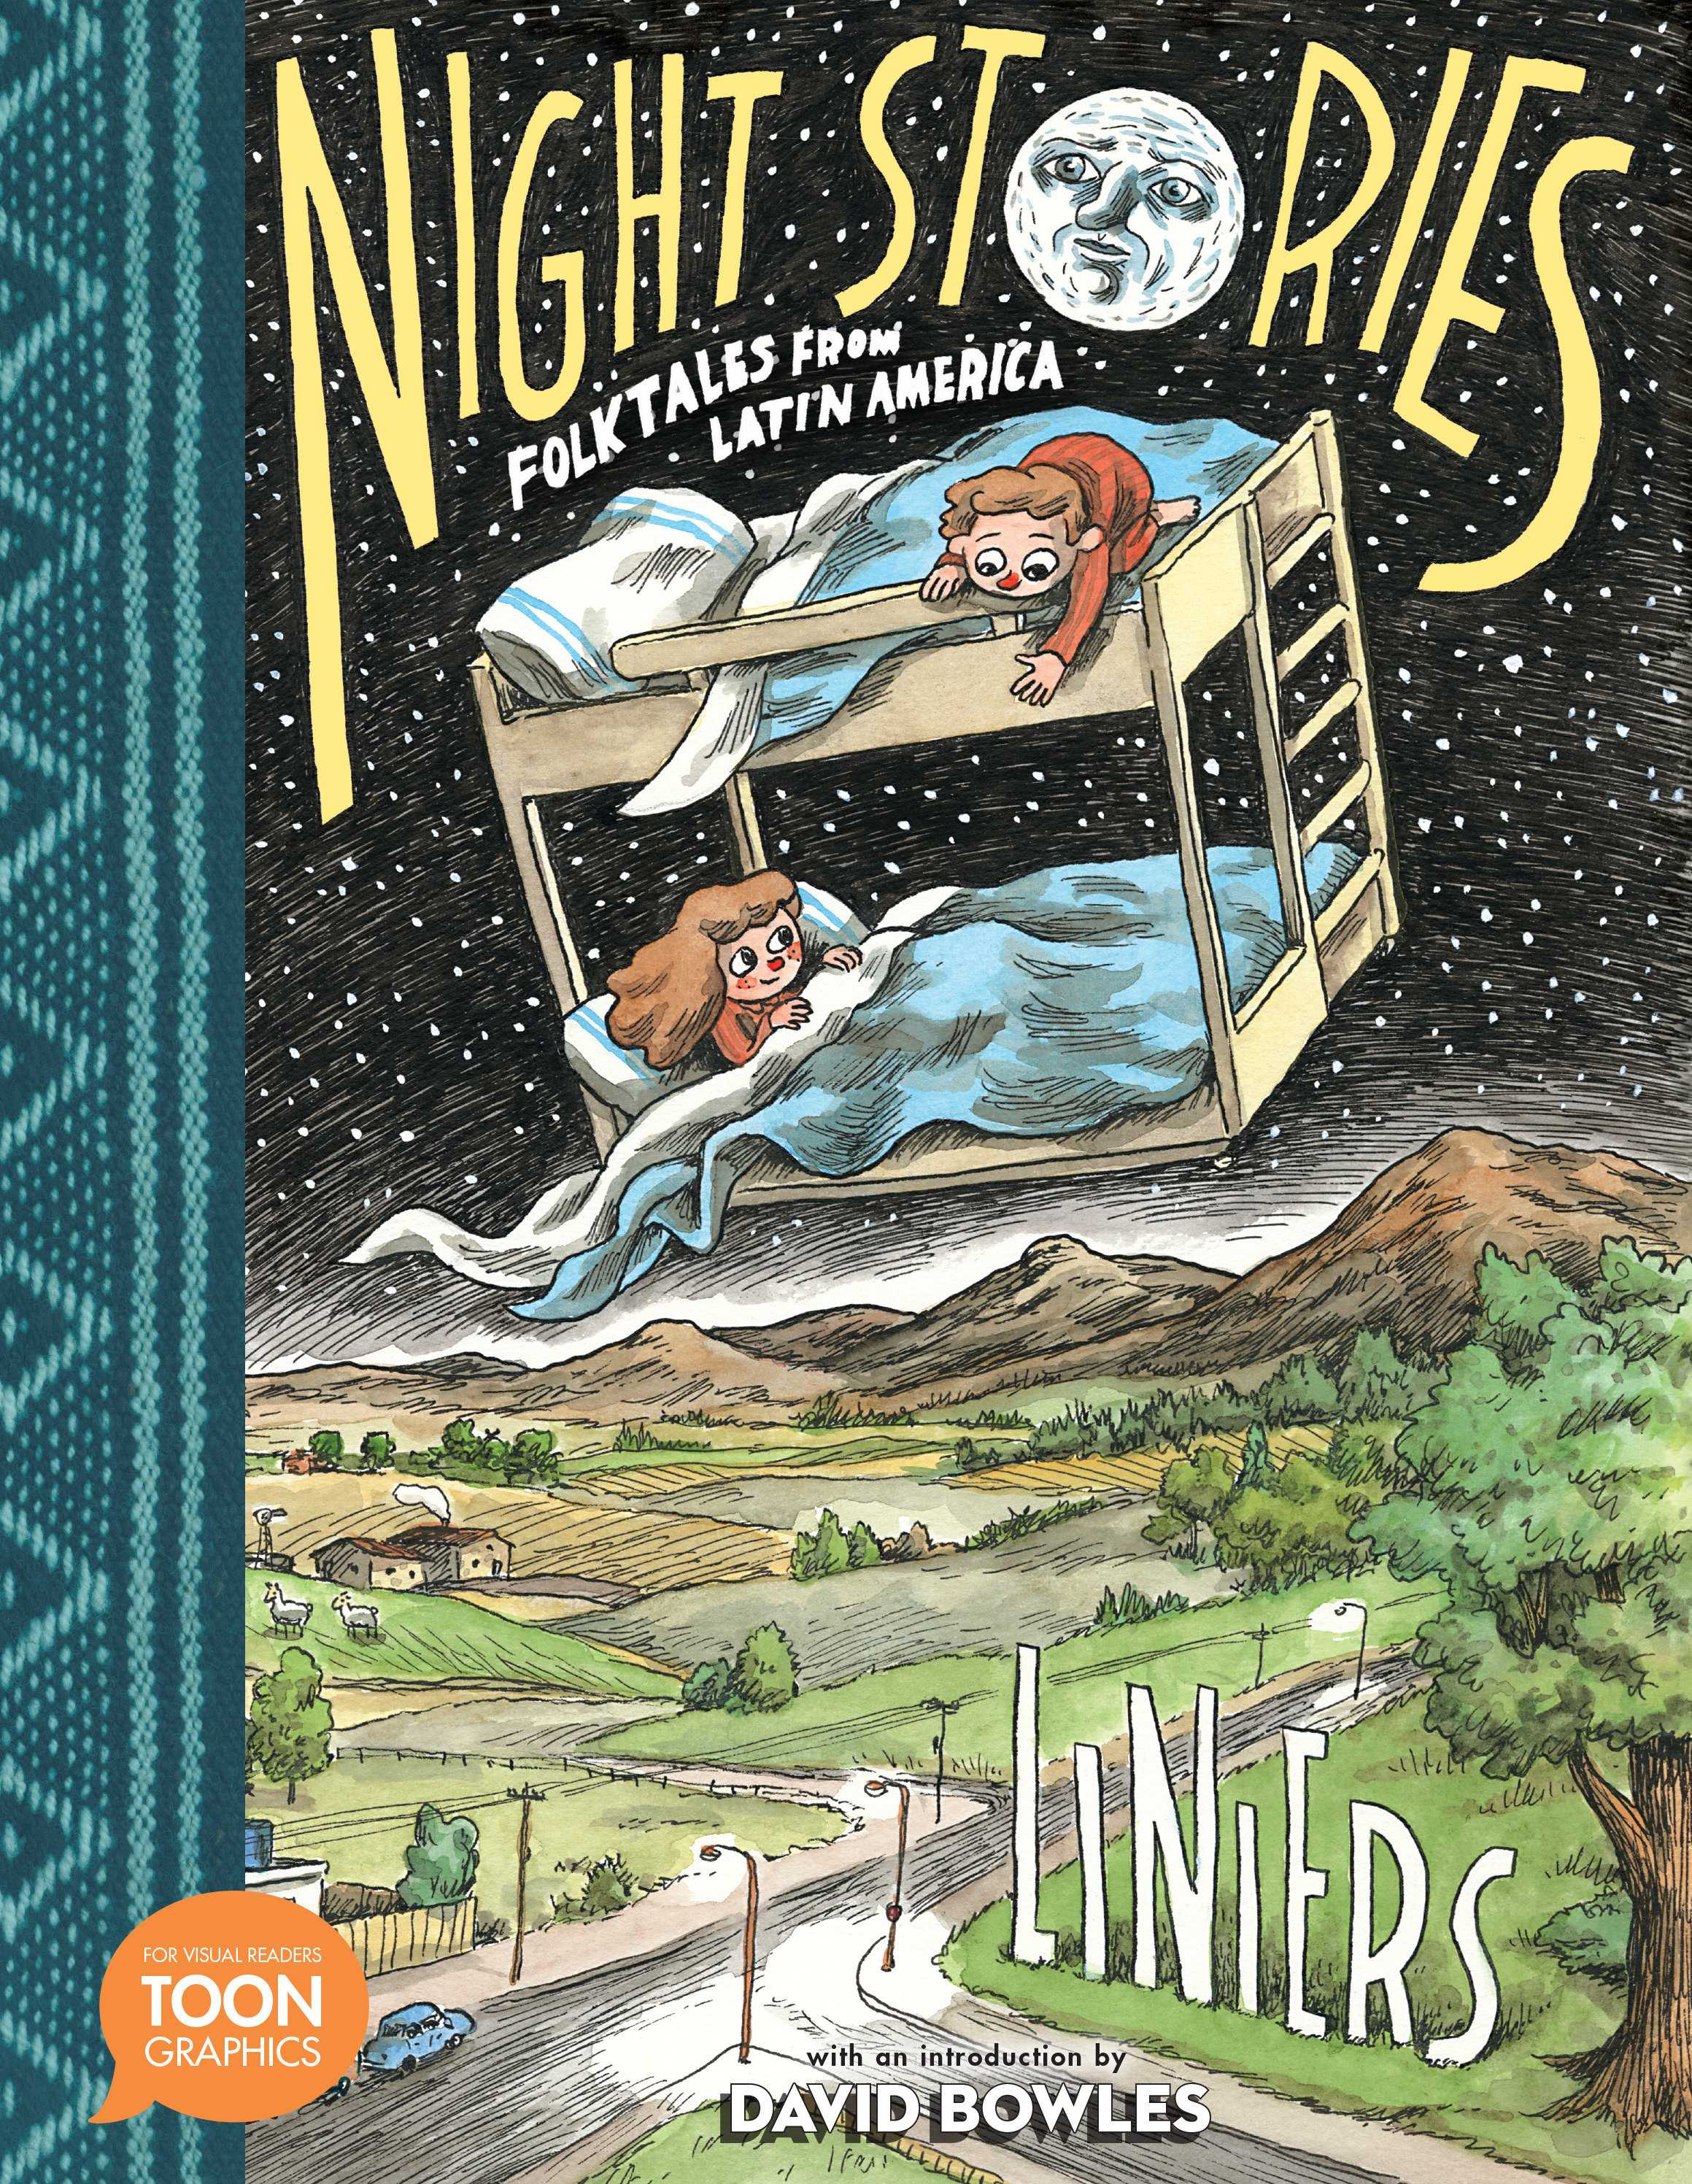 Night Stories Folktales From Latin America Graphic Novel